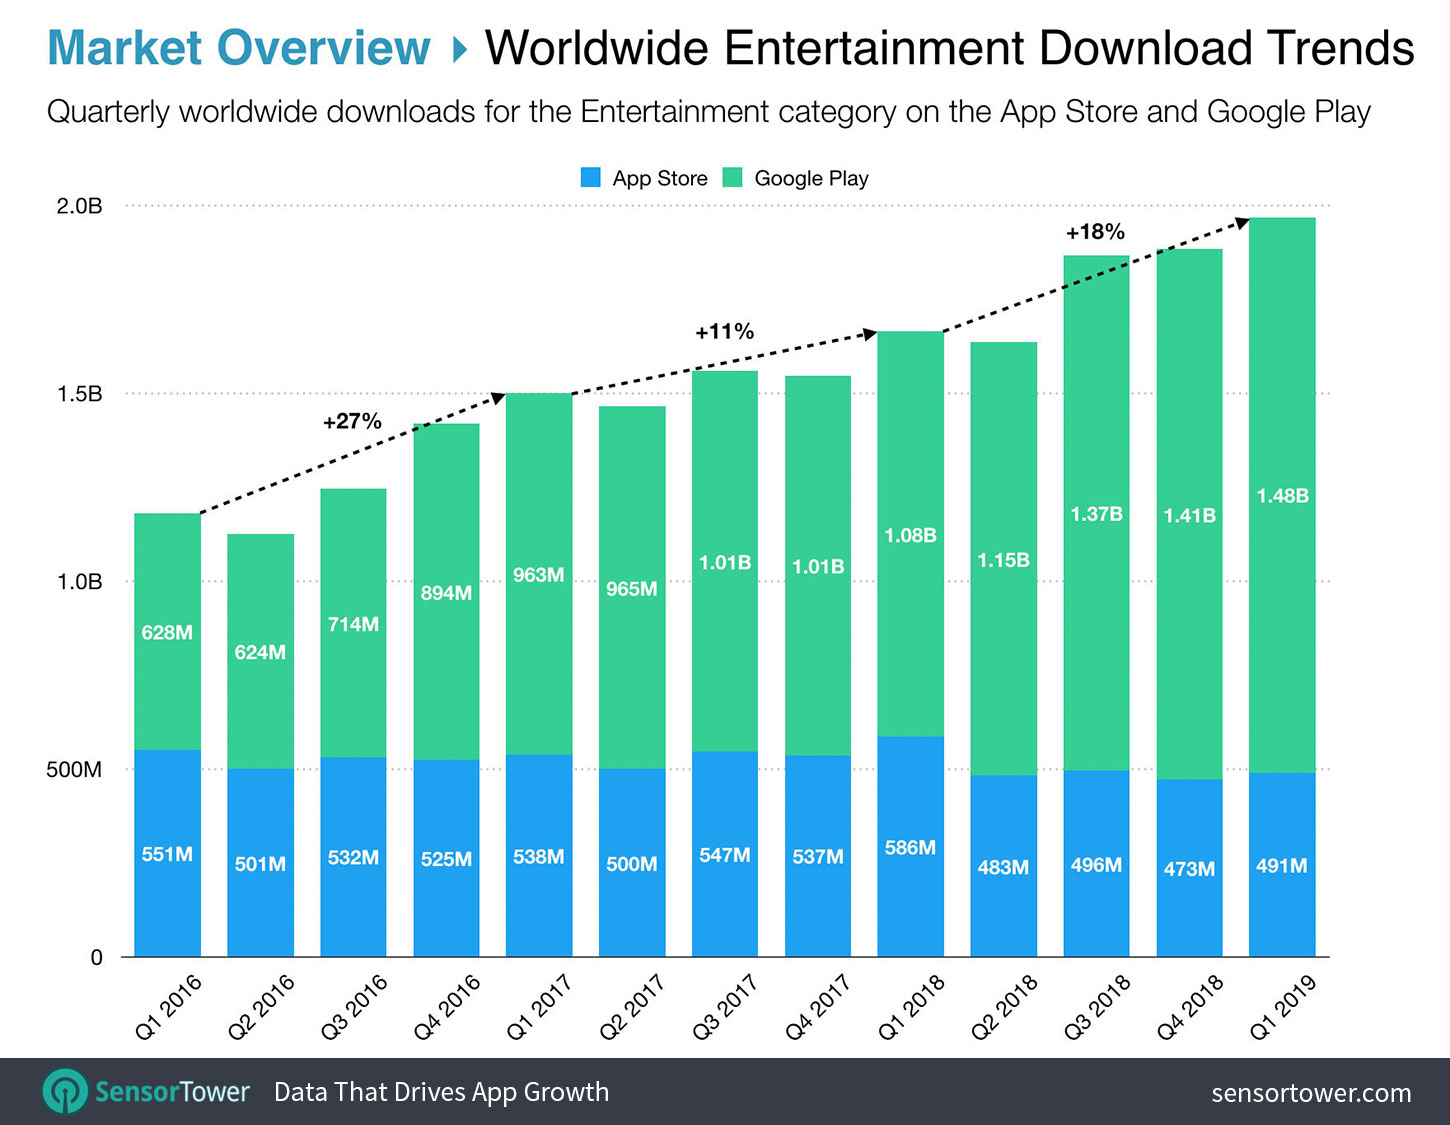 Worldwide Entertainment Download Trends from 2016 to 2019